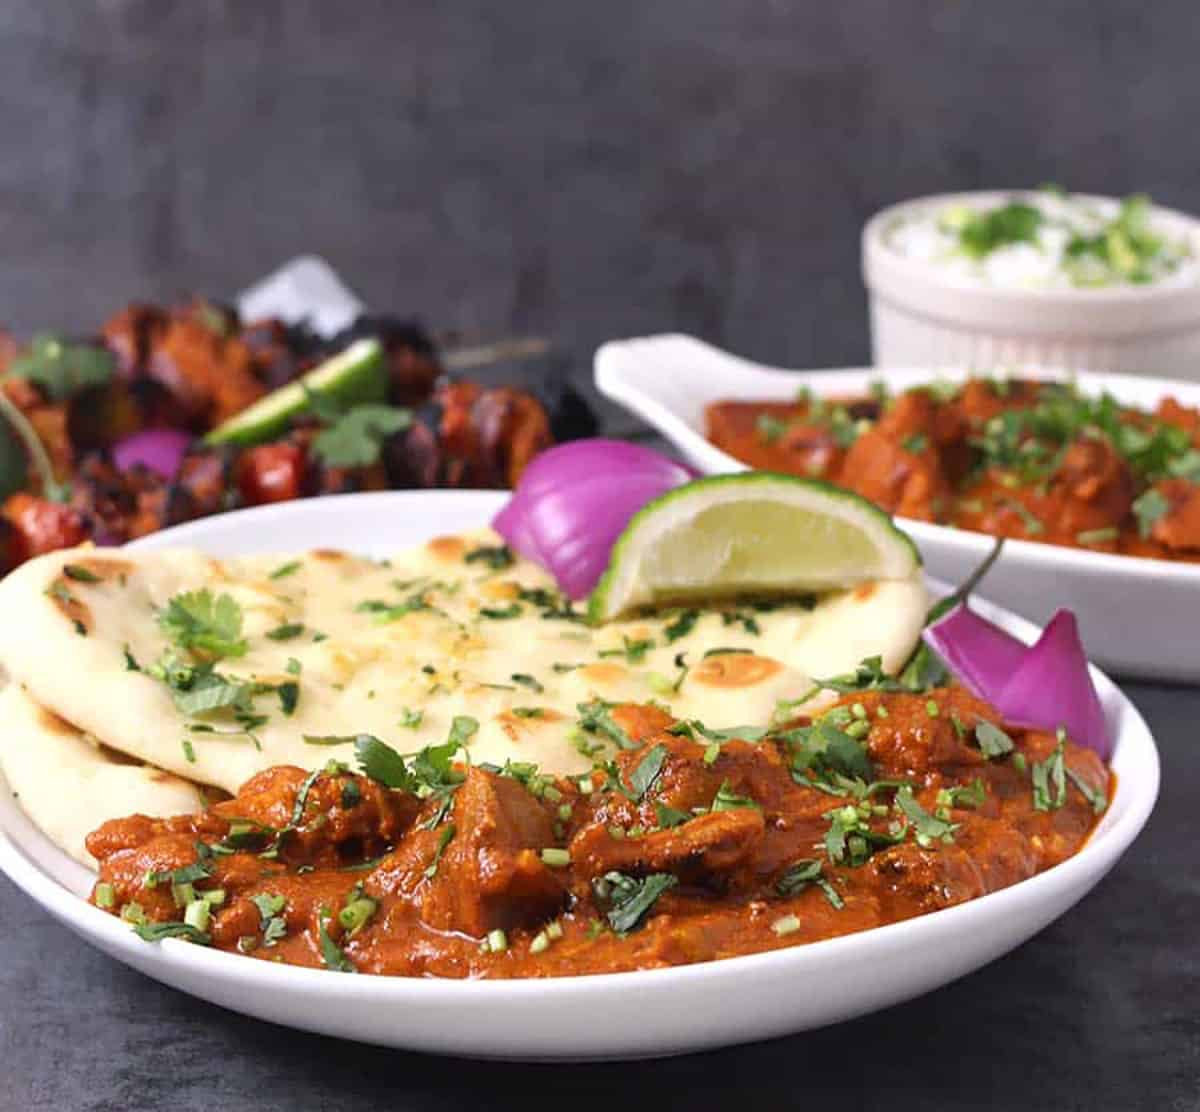 Authentic chicken tikka masala prepared at home that is serve in a white plate along with naan bread, red onion slices and a lemon wedge.